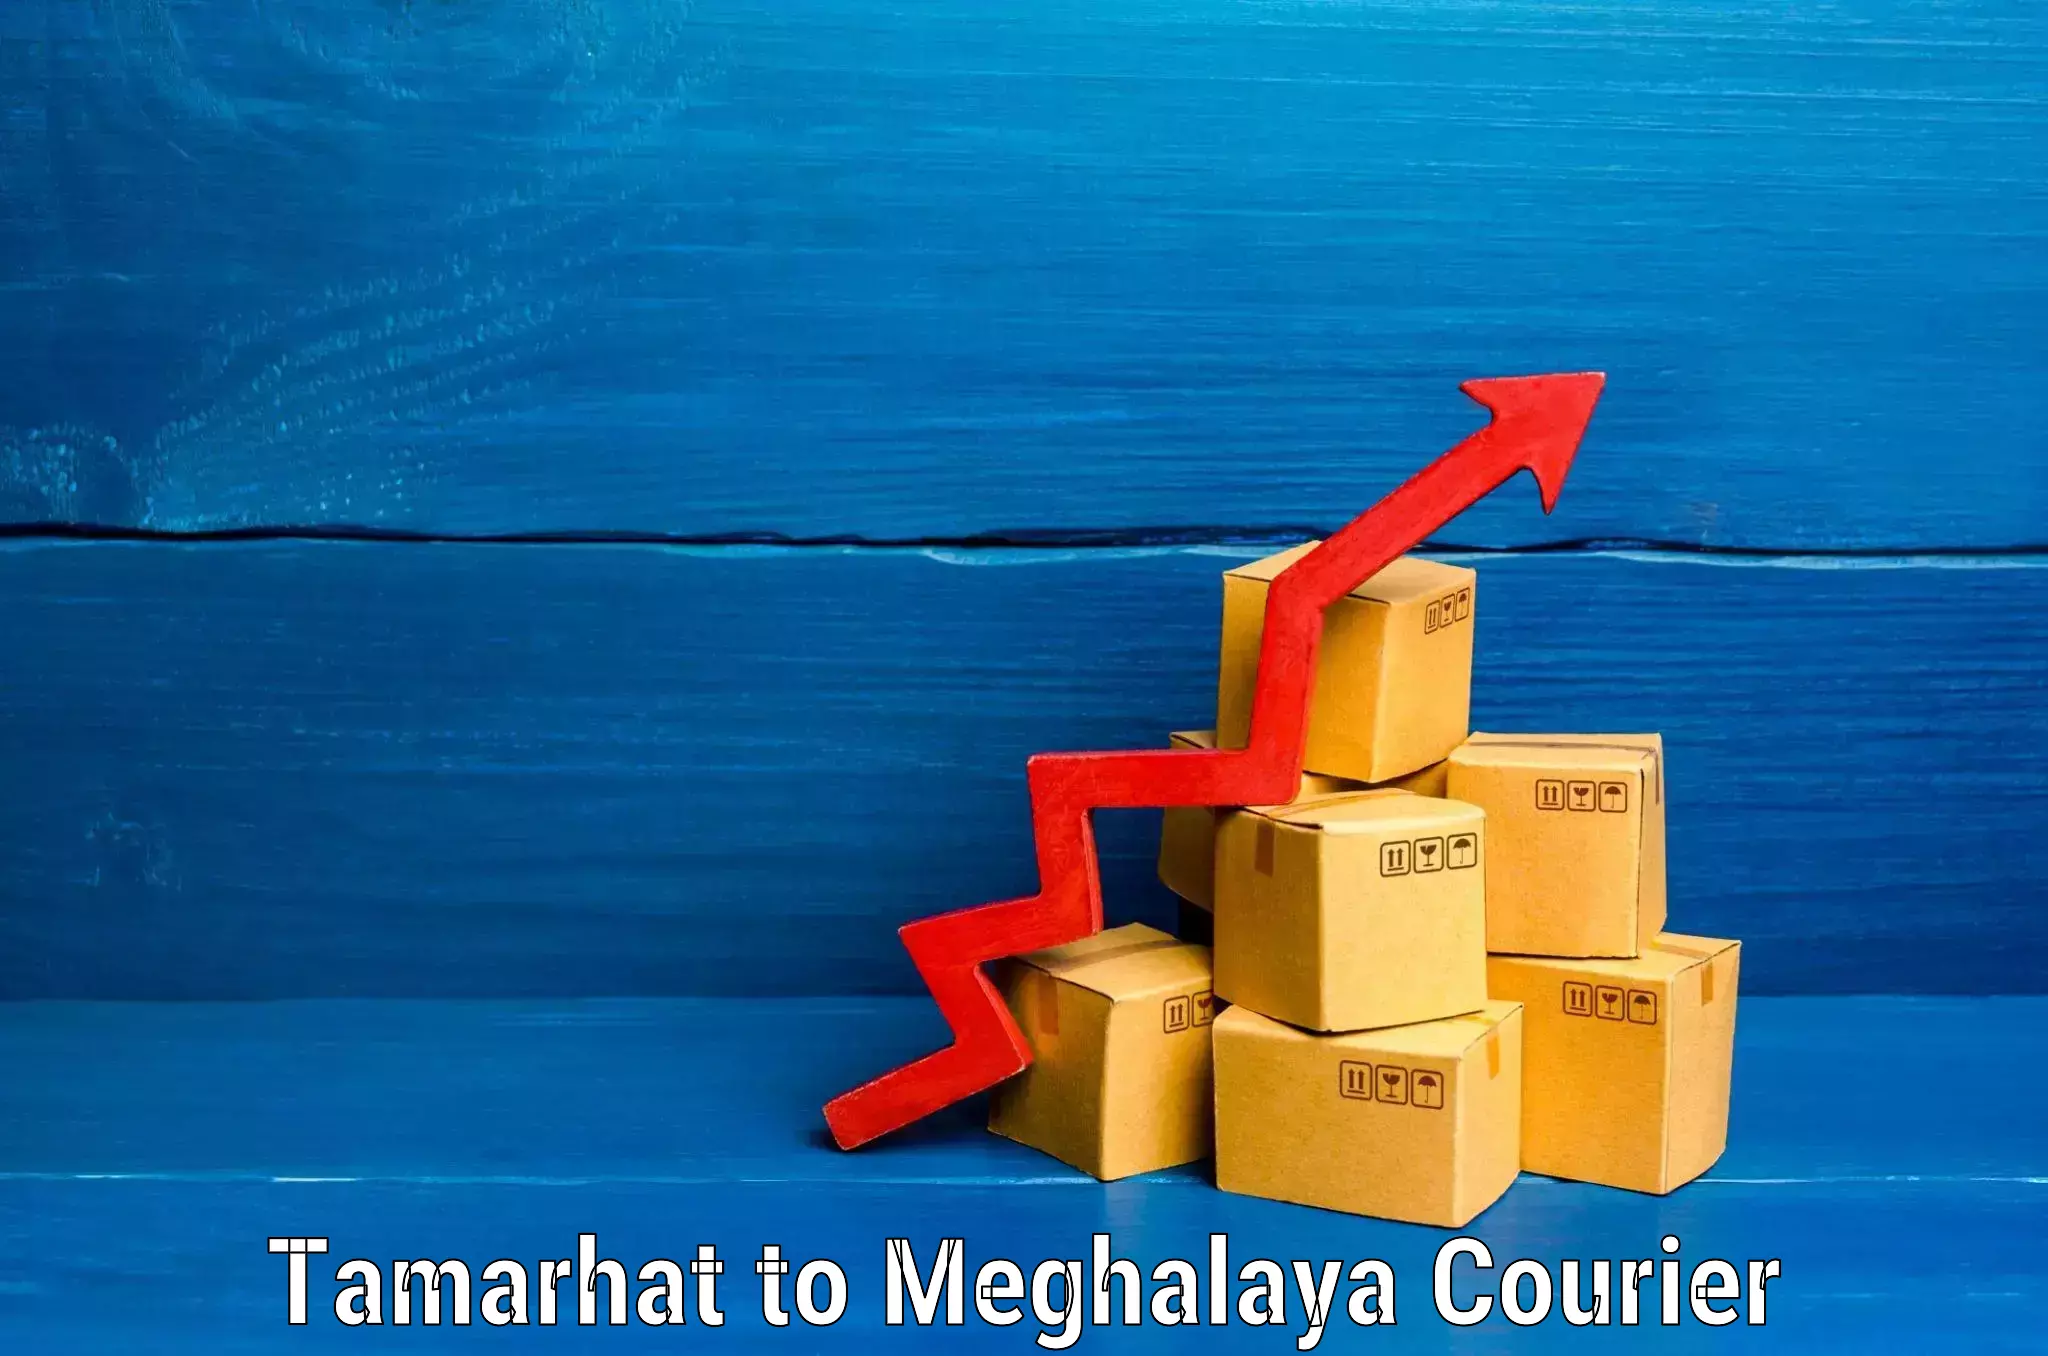 Luggage transport consulting Tamarhat to Dkhiah West